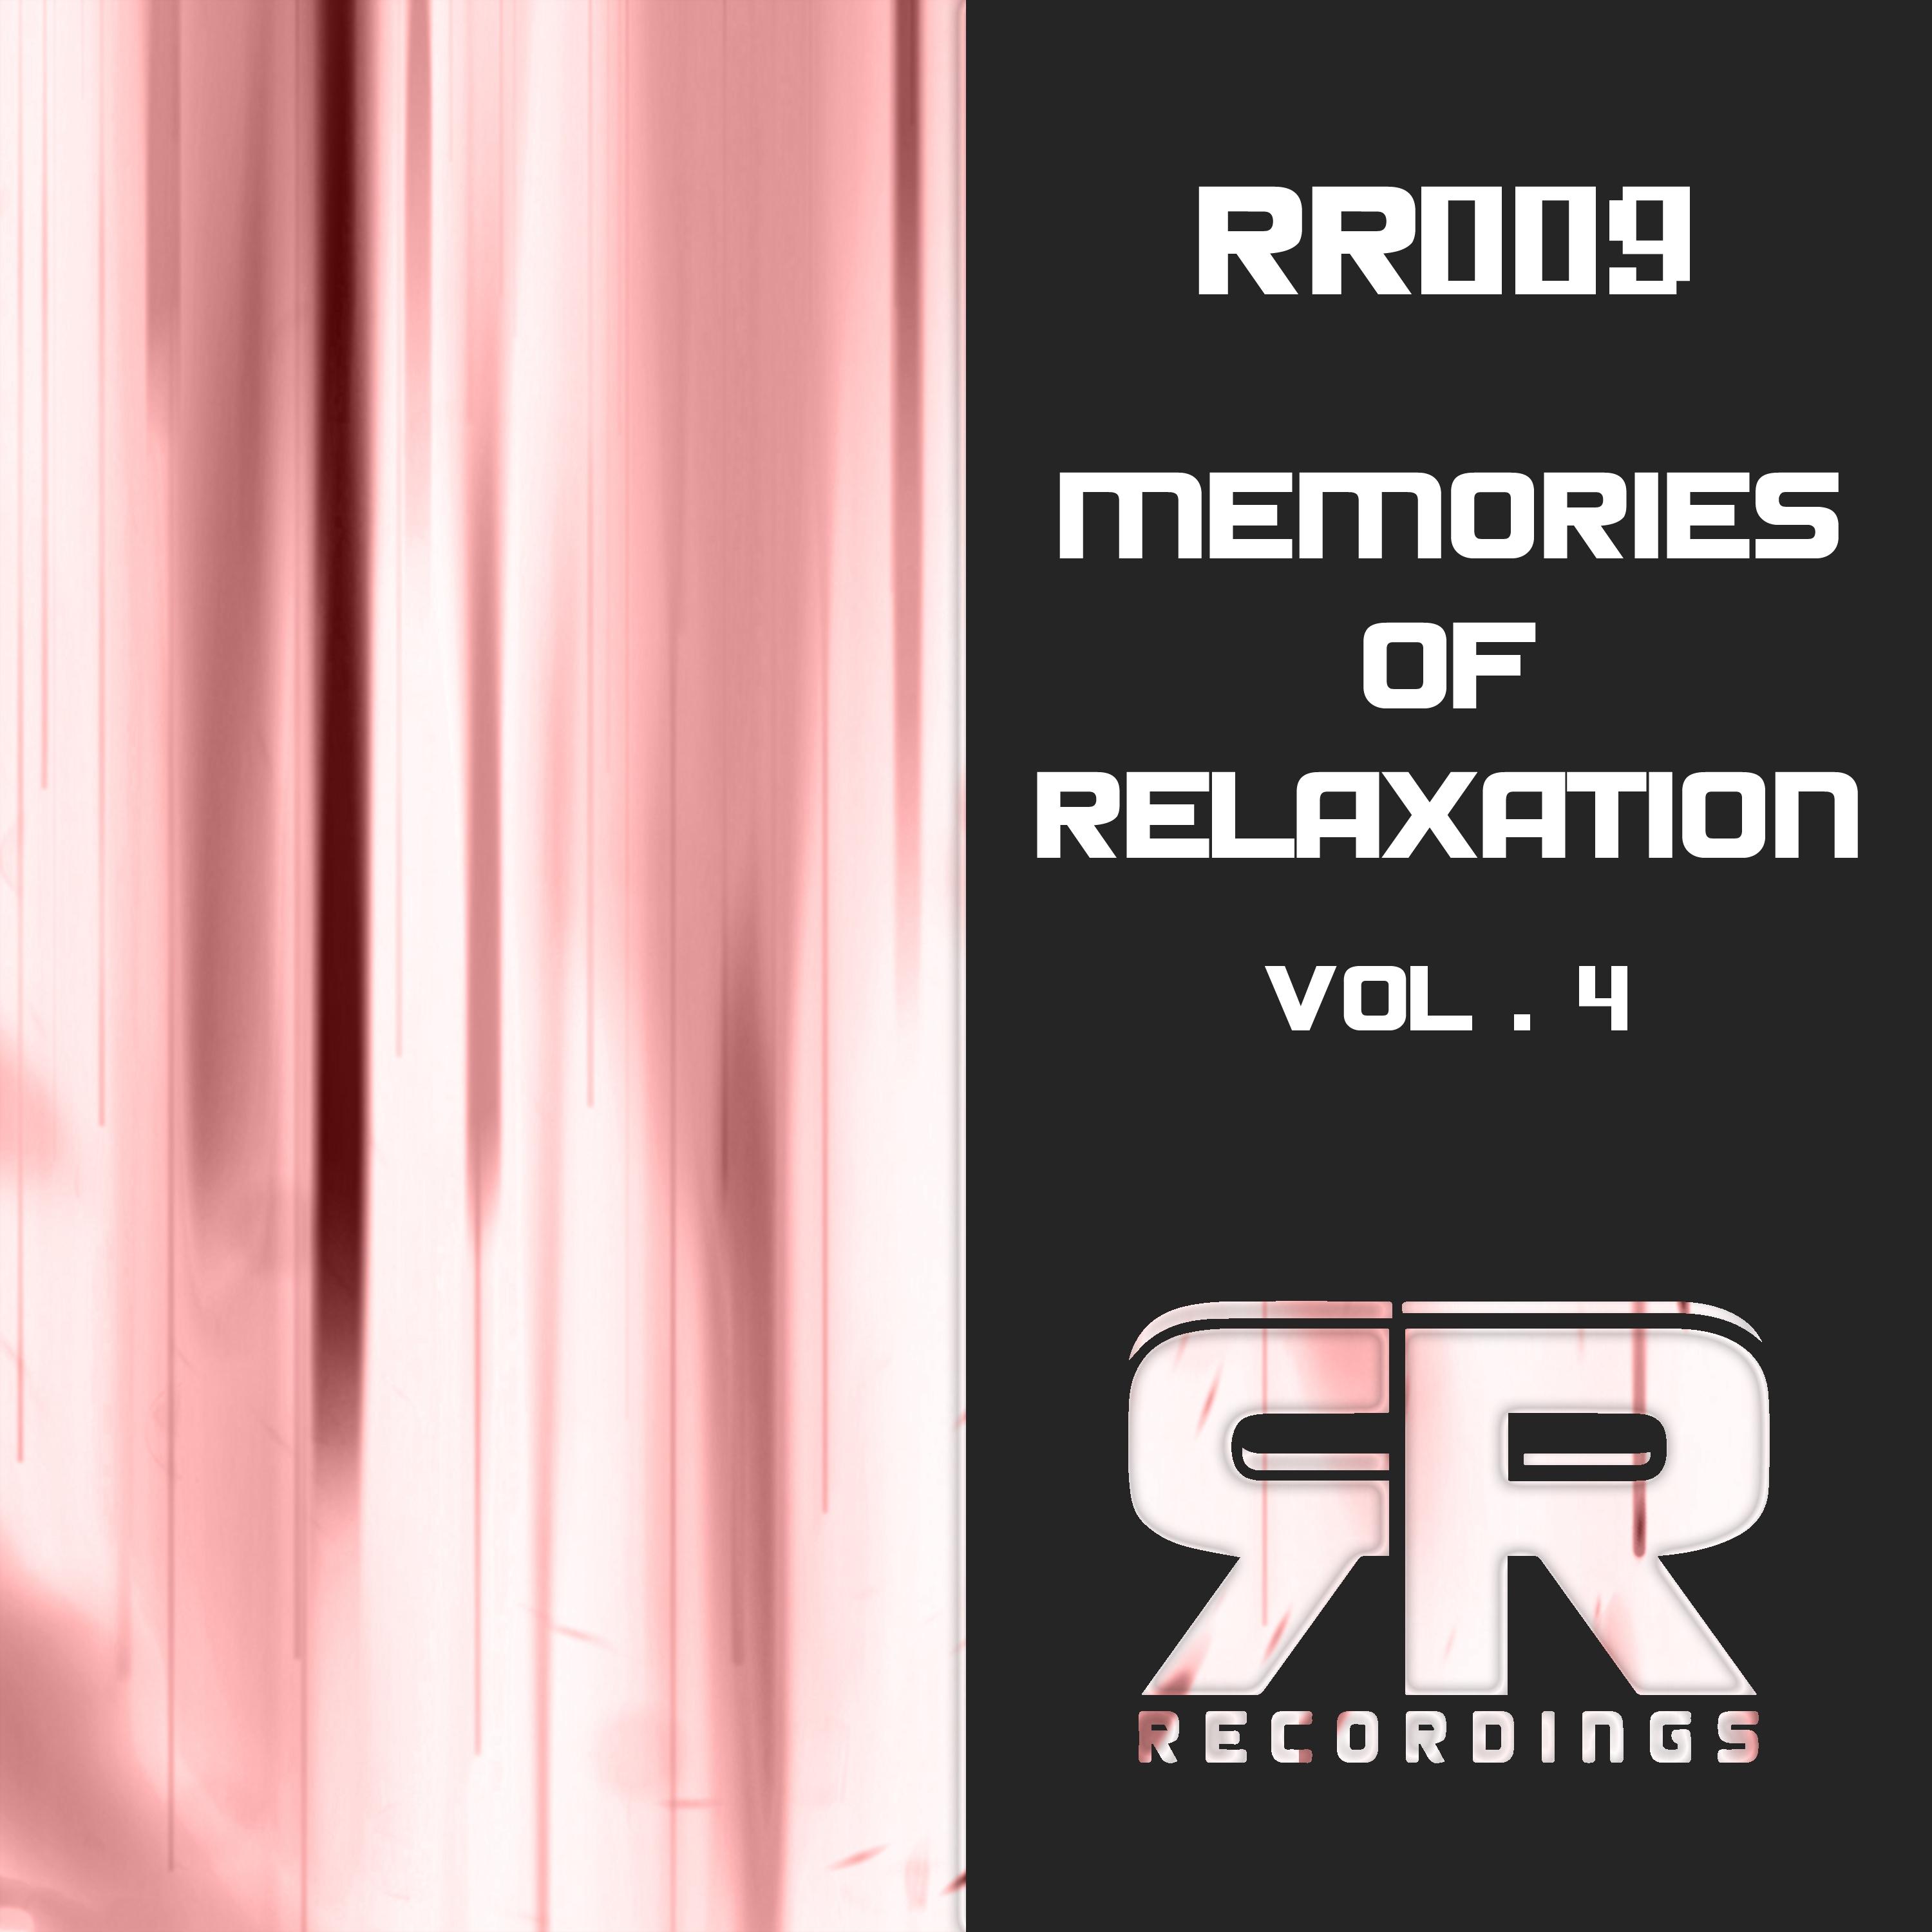 Memories of Relaxation, Vol. 4